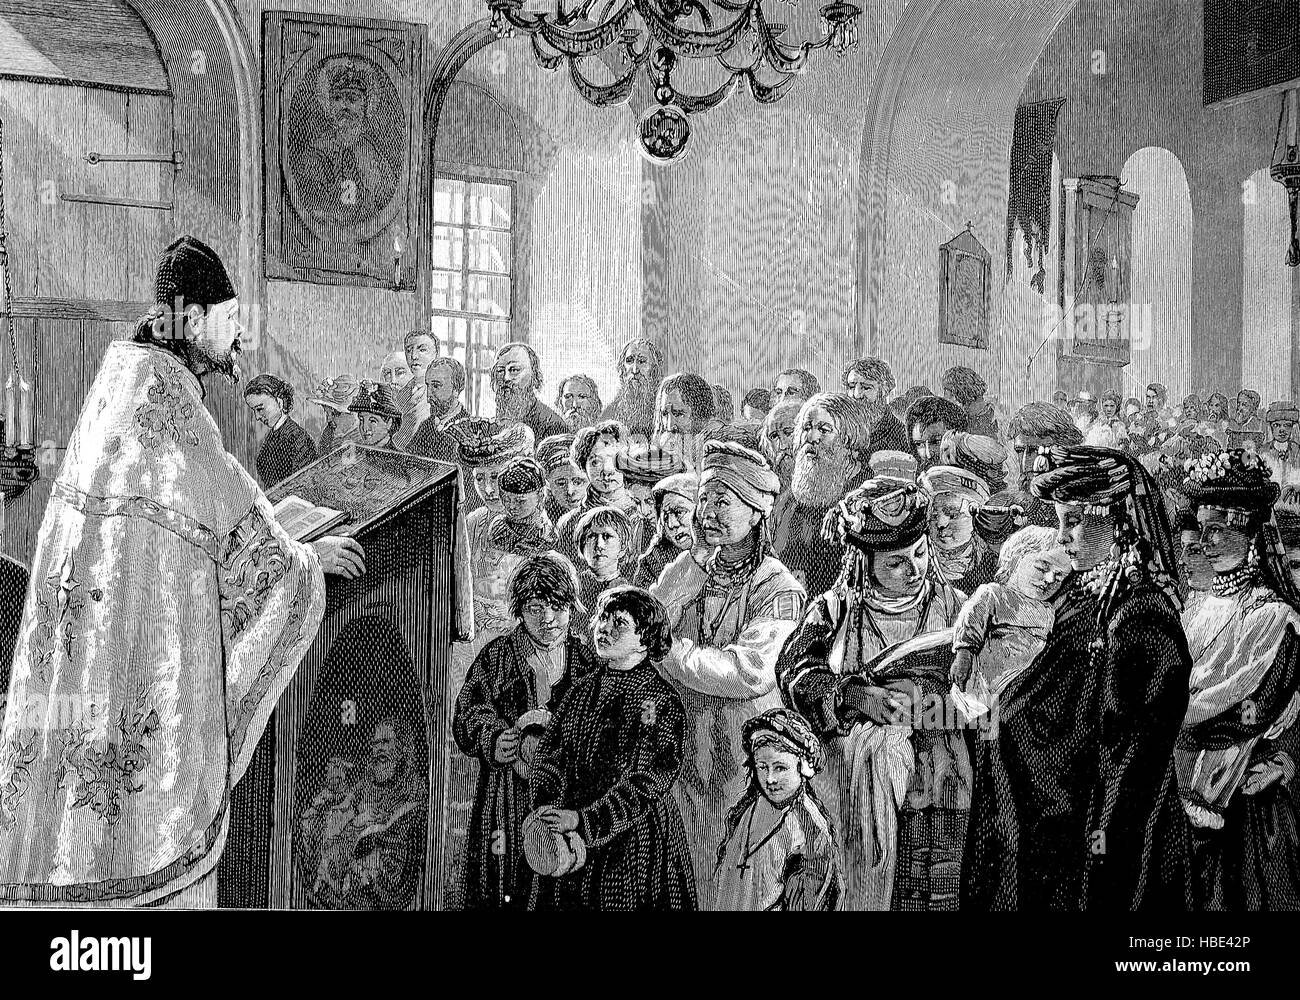 Worship in a Russian village church, Russia, illustration, woodcut from 1880 Stock Photo